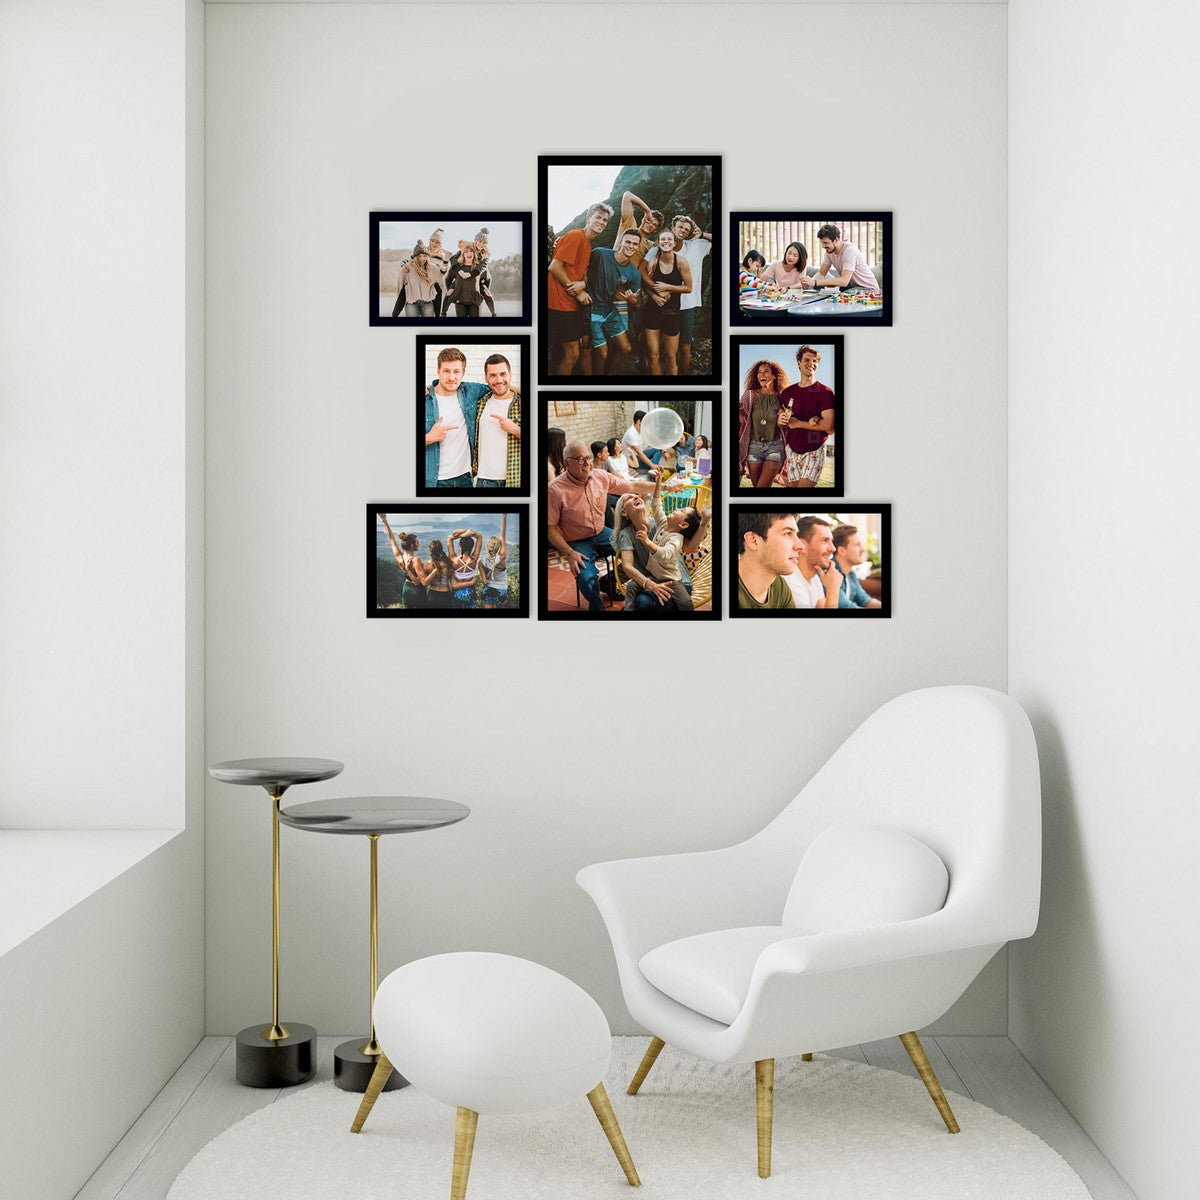 Memory Wall Collage Photo Frame - Set of 8 Photo Frames for 6 Photos of 5"x7", 2 Photos of 8"x10" 2